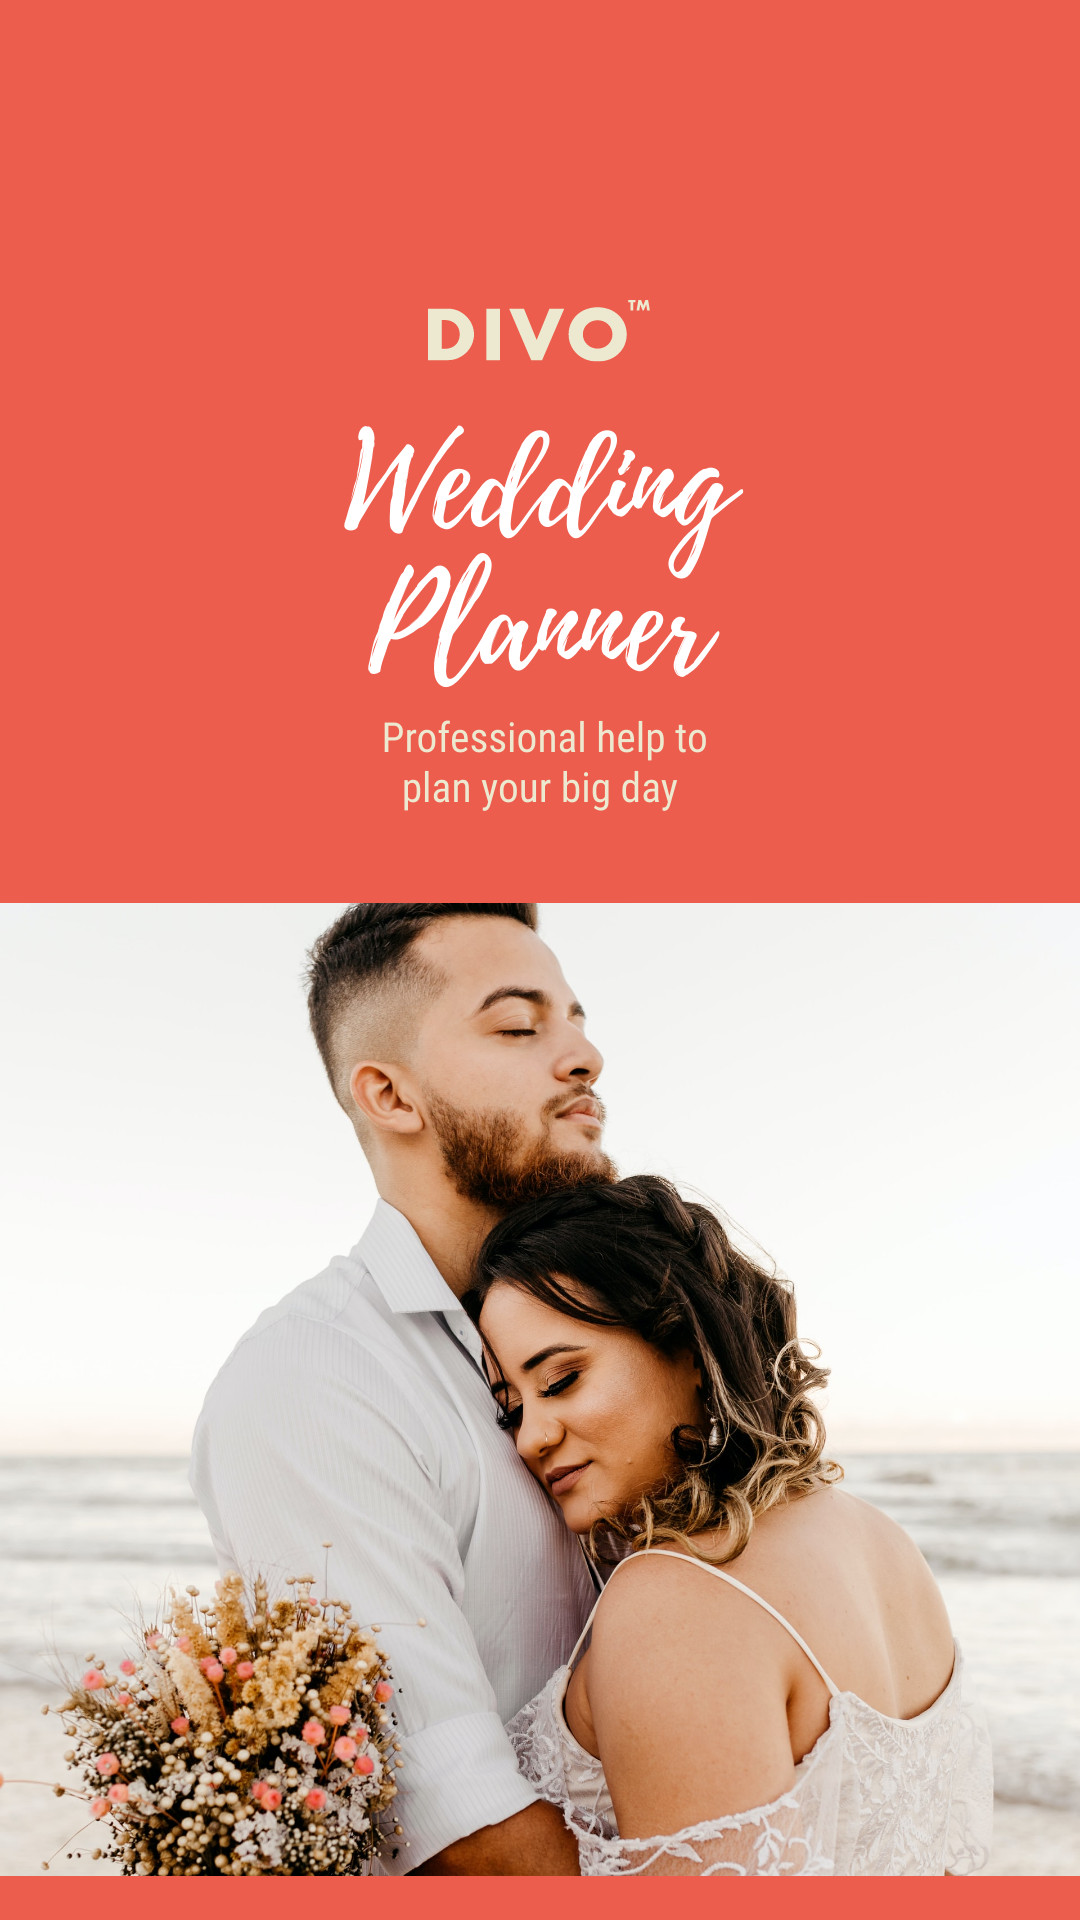 Professional Wedding Planner for Your Big Day  Inline Rectangle 300x250